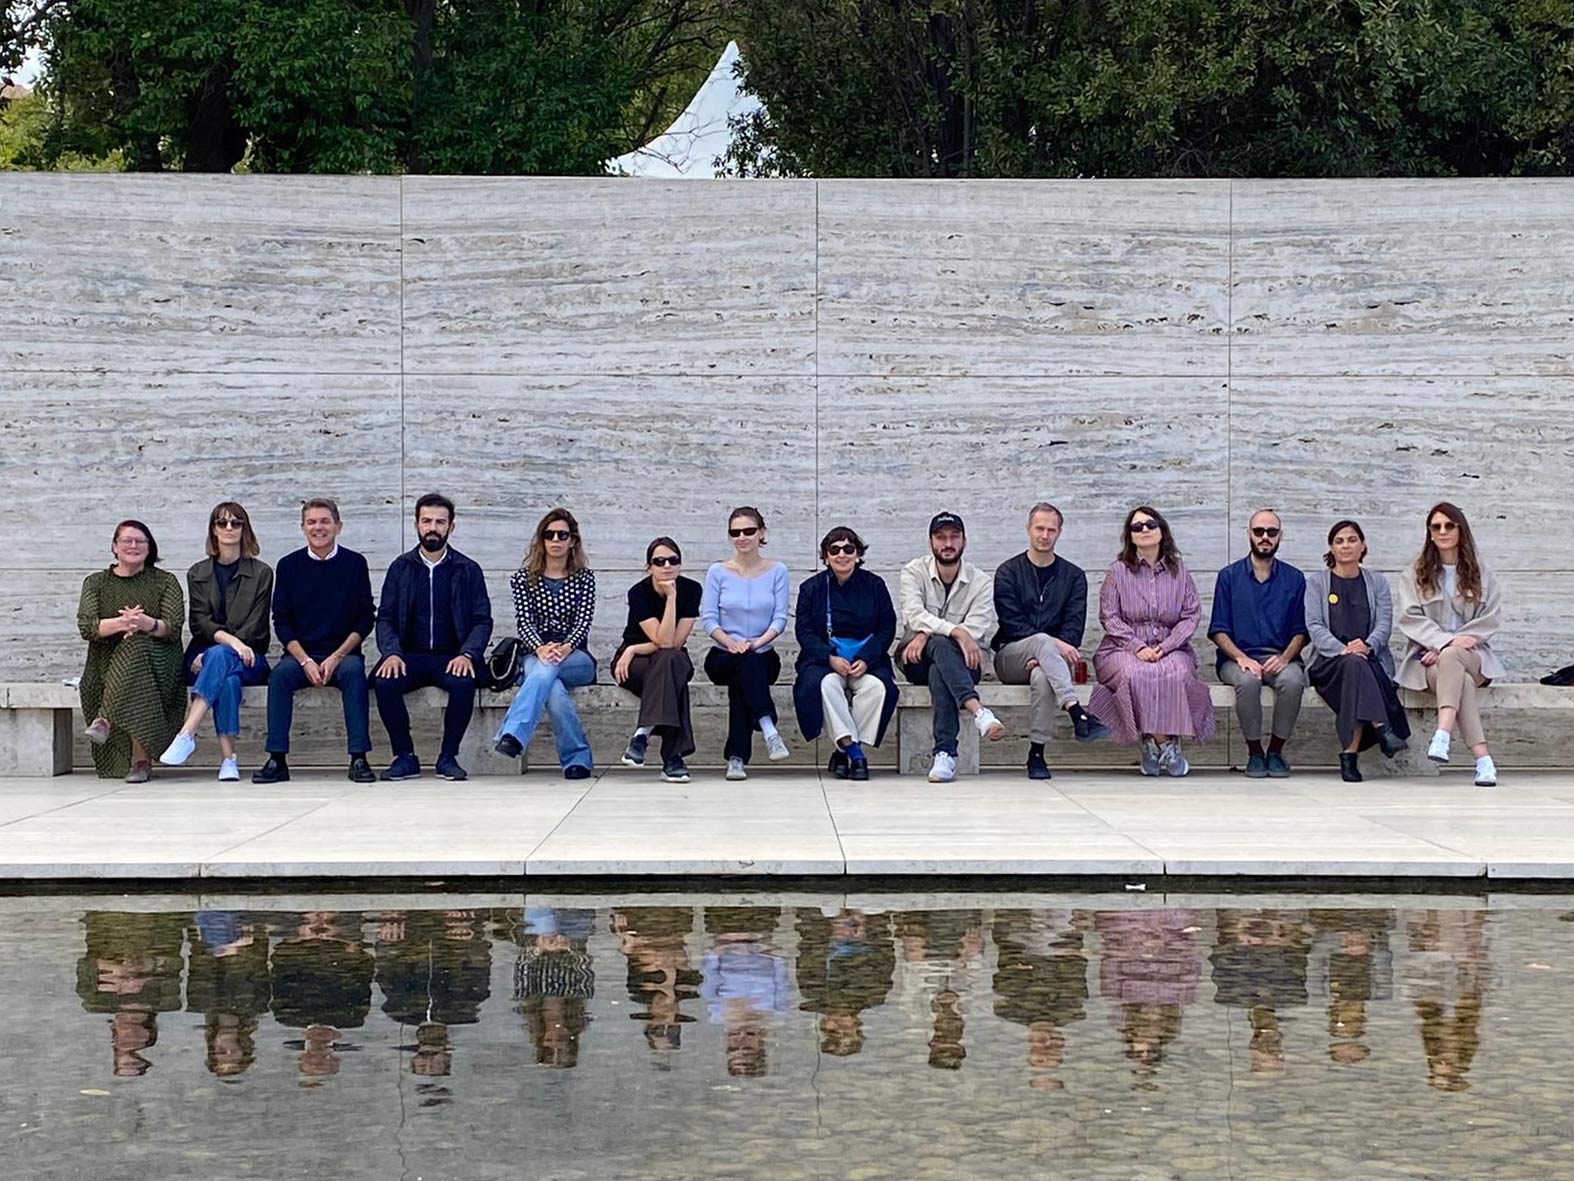 Participants of the project in the Fundació Mies van der Rohe